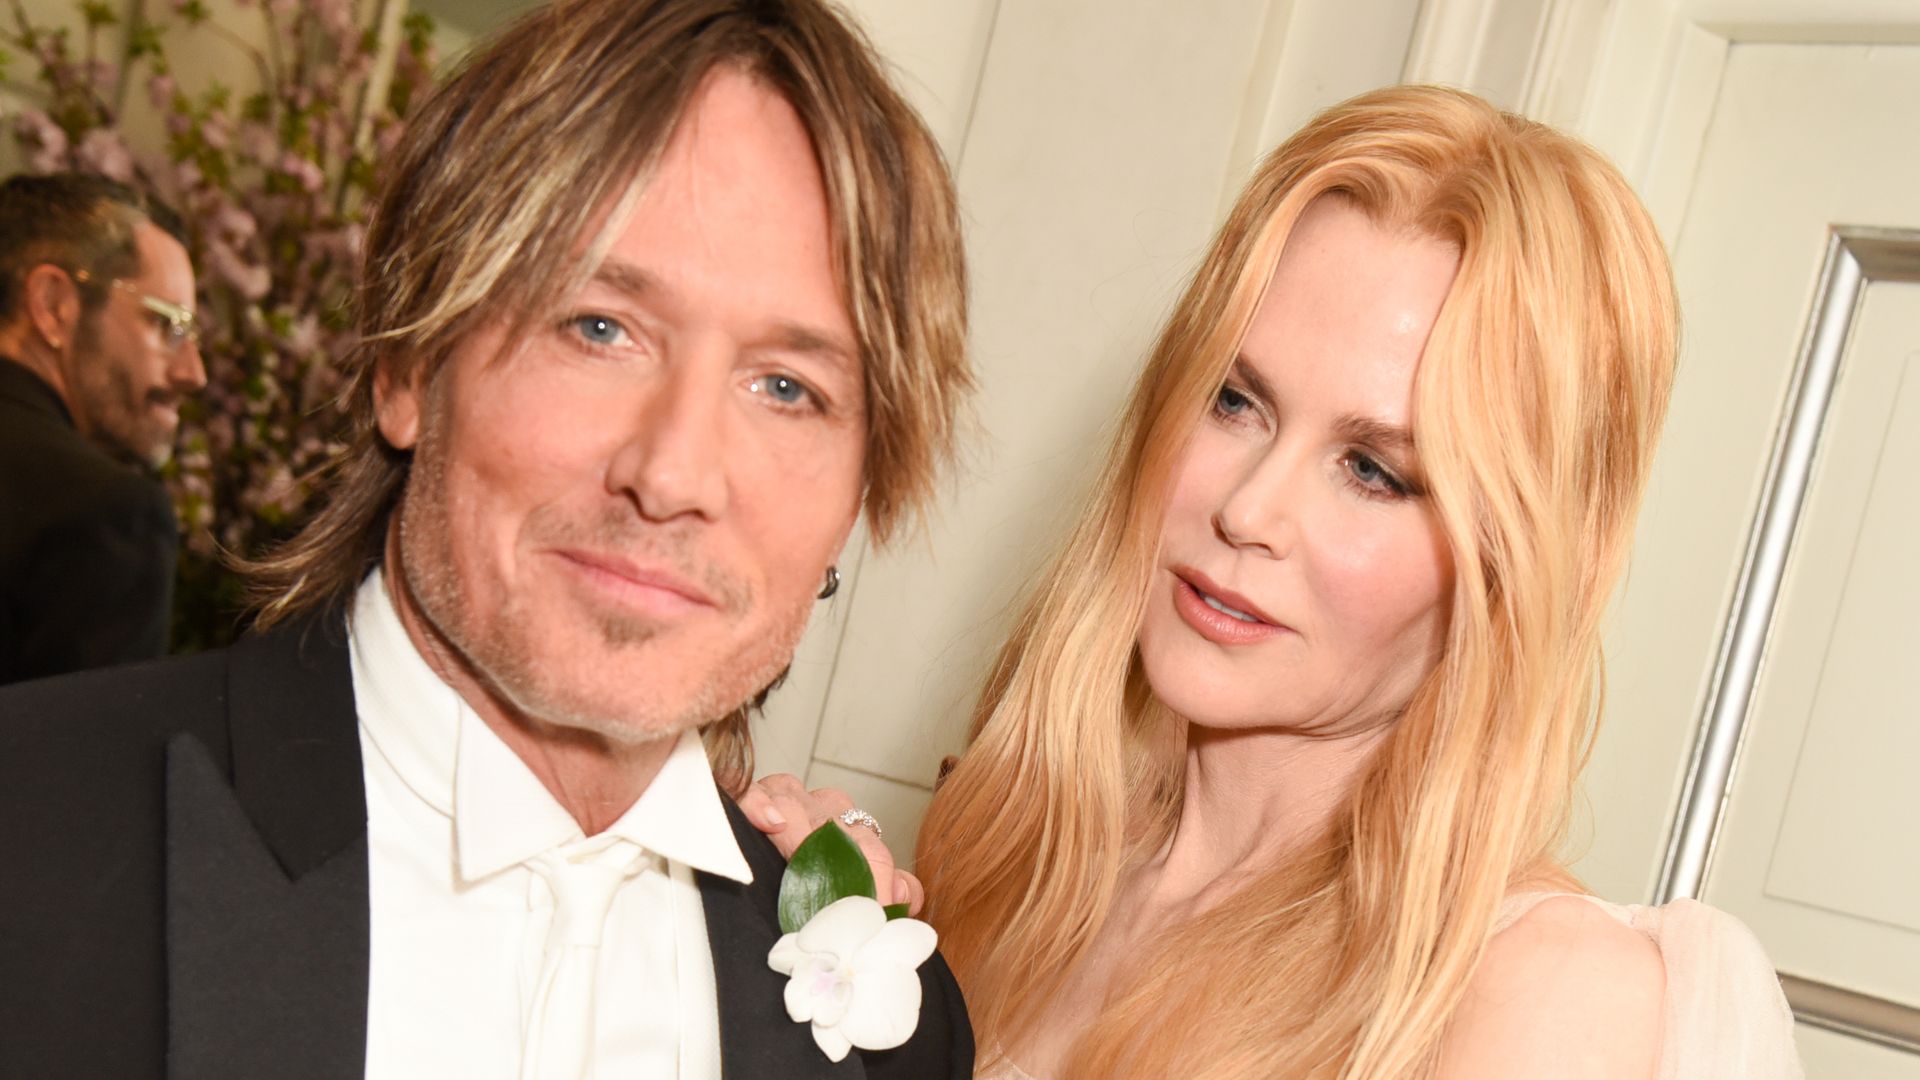 Keith Urban In a suit and Nicole Kidman in a sparkly nude pink dress